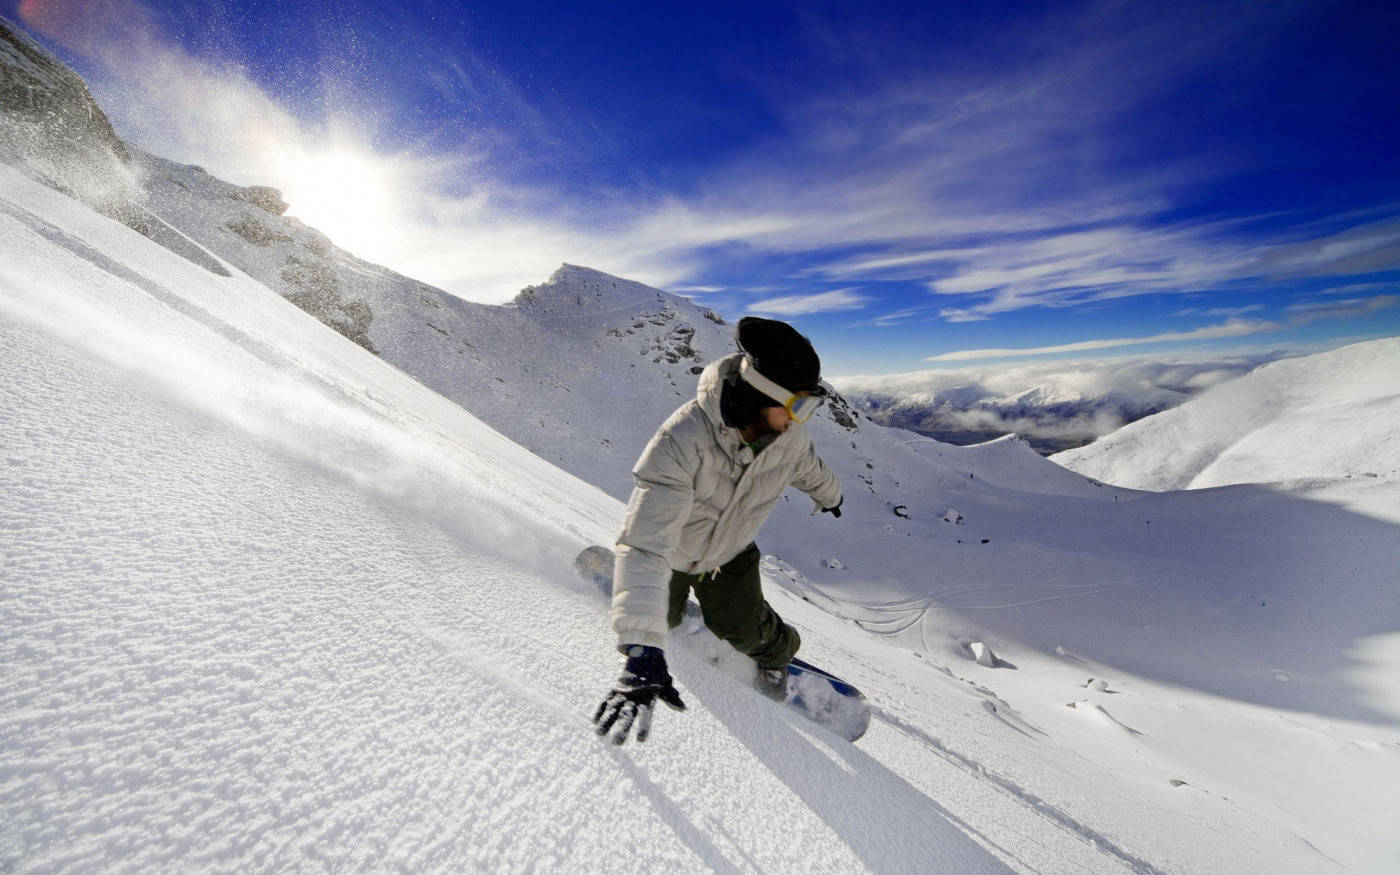 Man In White With Snowboard Descending A Slope Picture